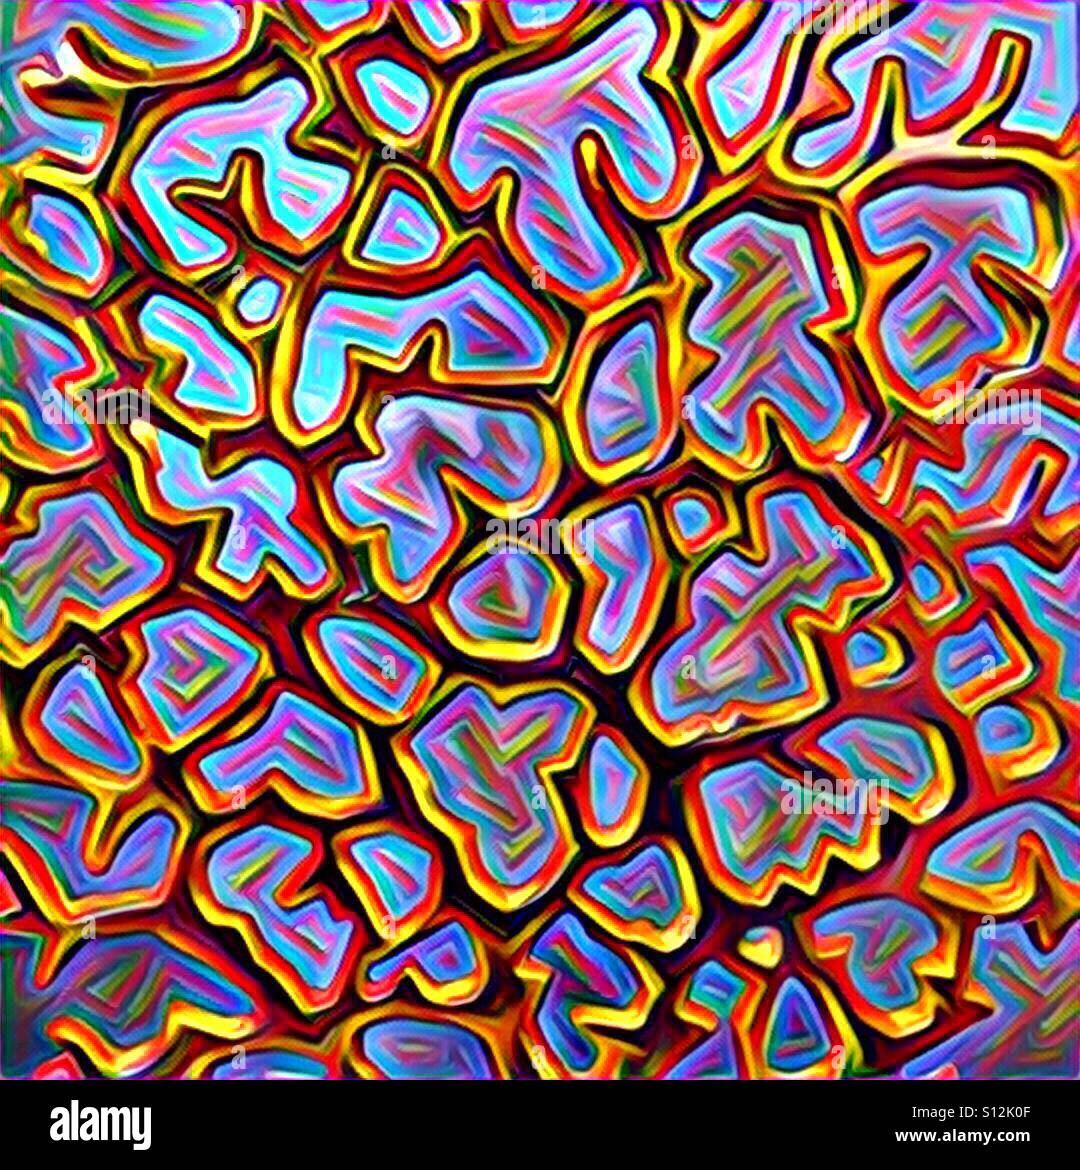 An abstract digital artwork of a golden intertwined pattern with a colorful rainbow colored background Stock Photo